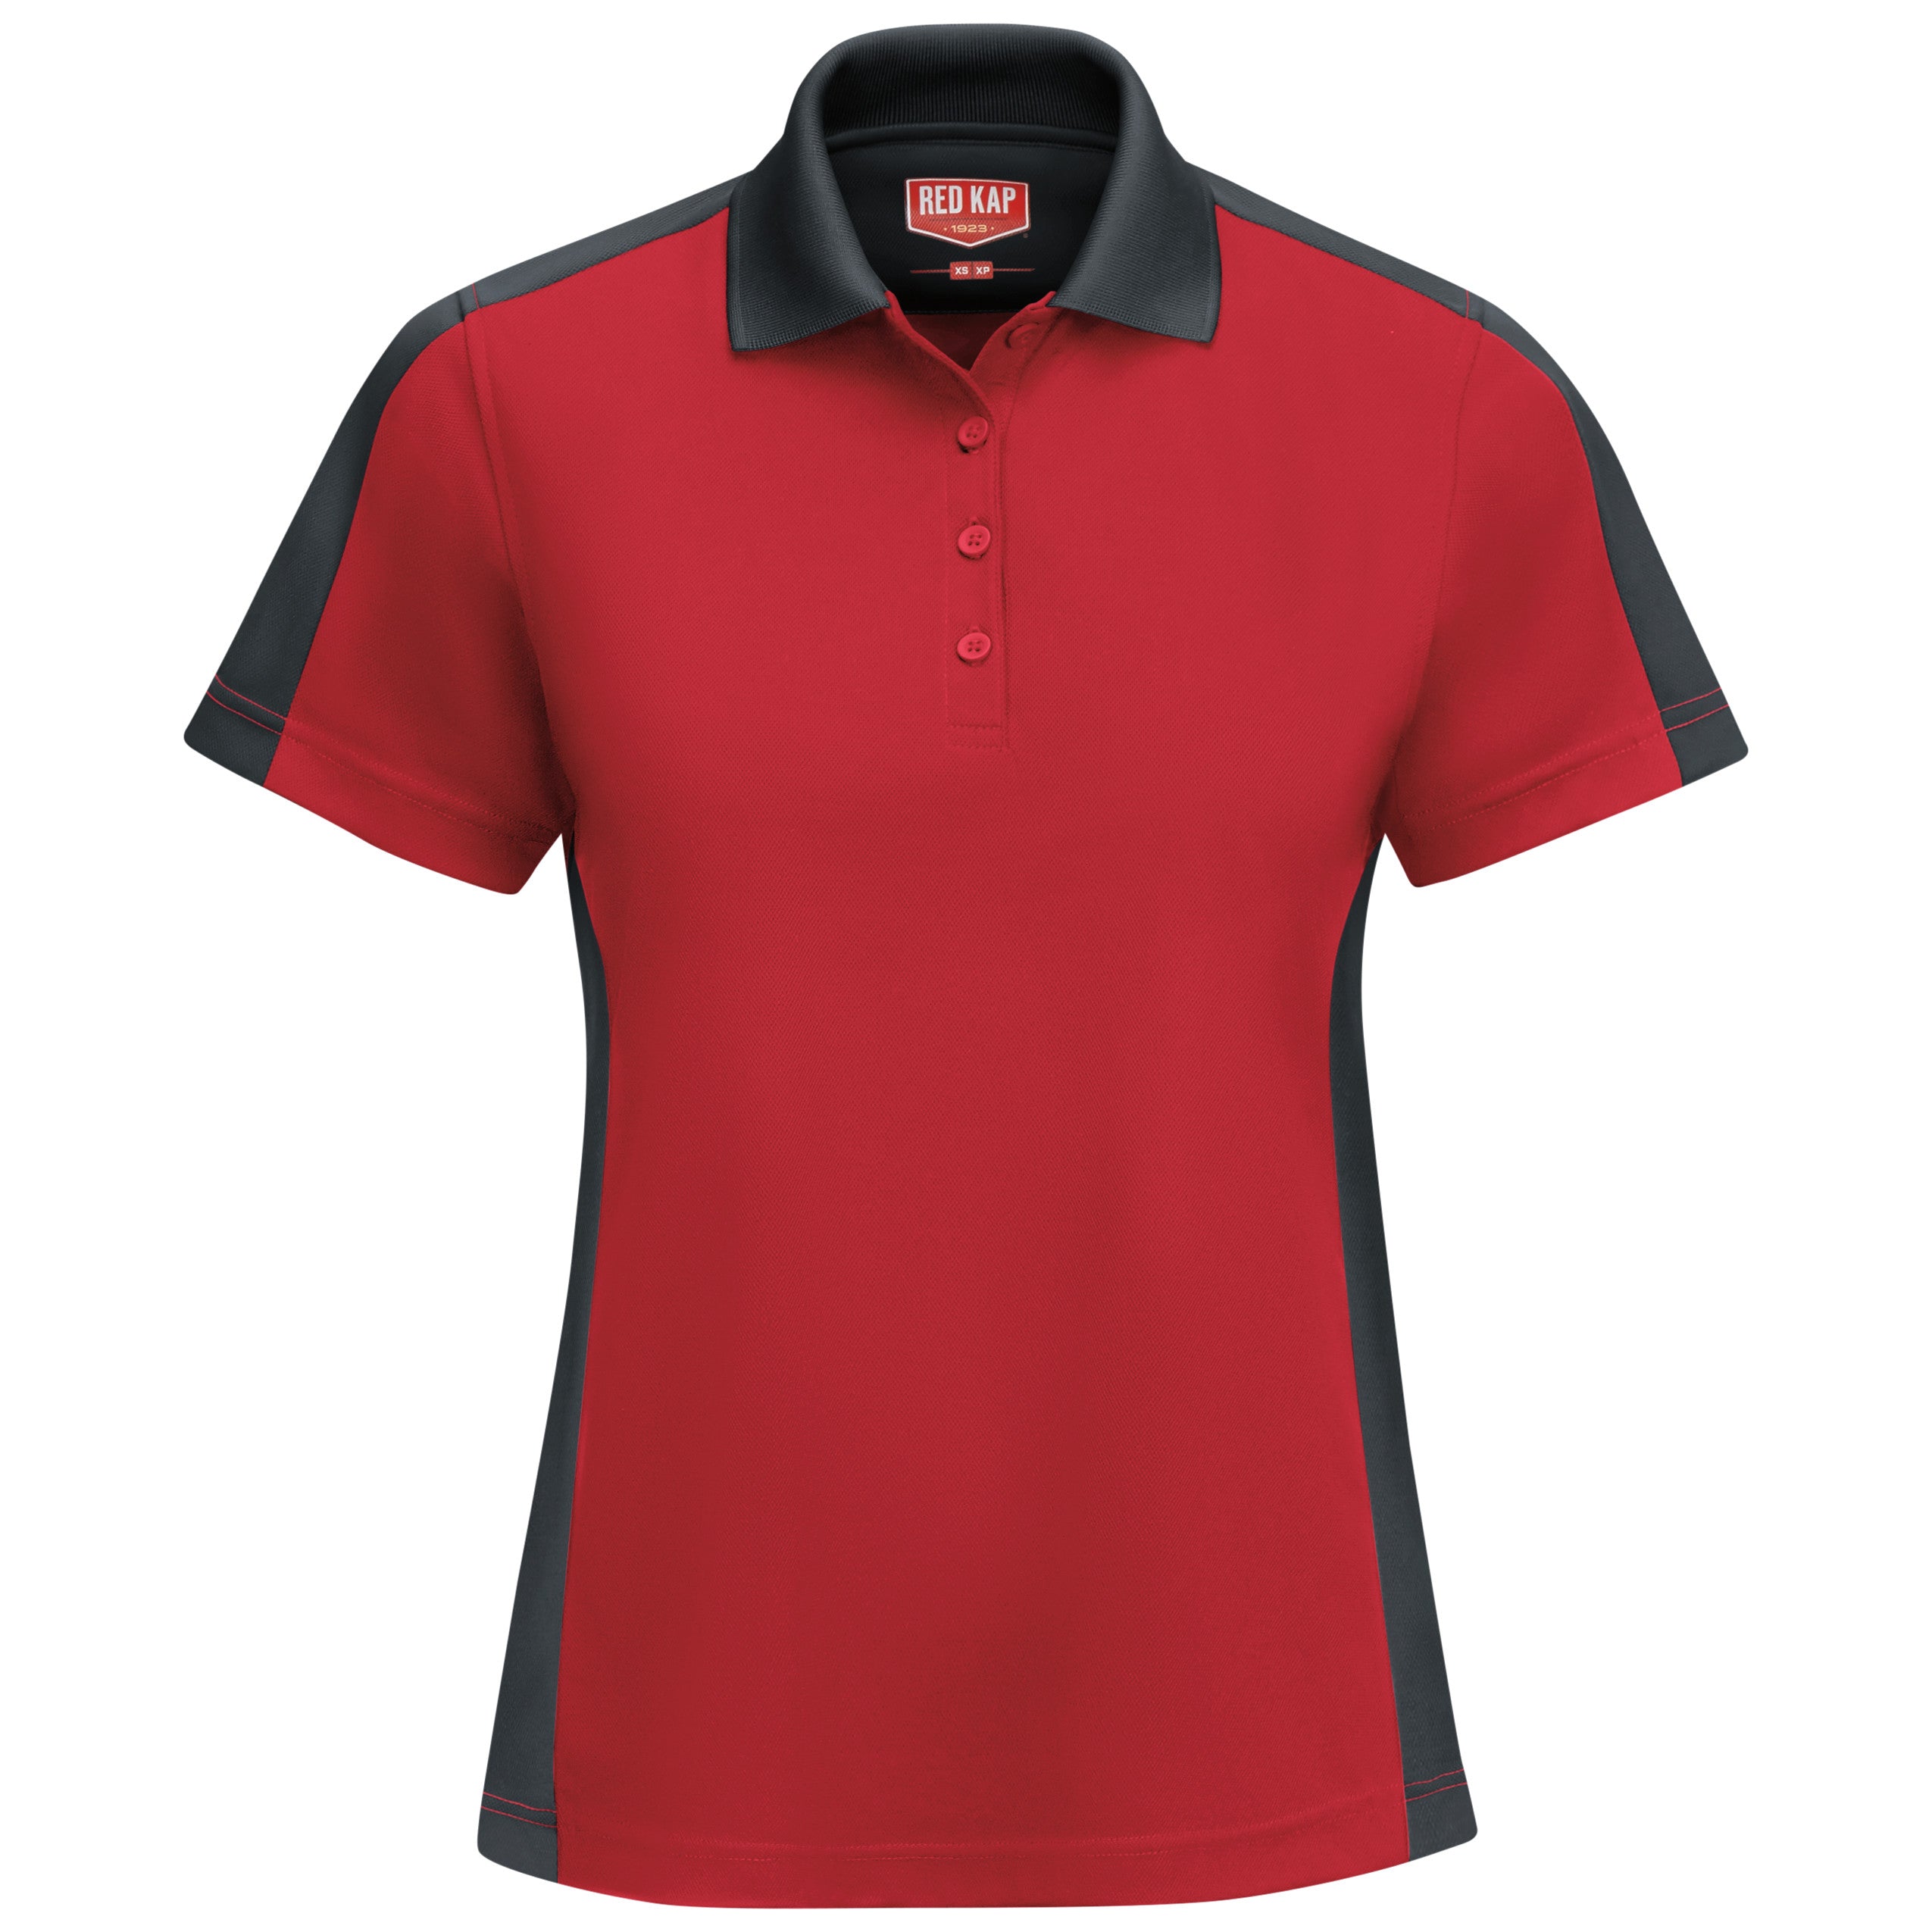 Red Kap Women's Short Sleeve Performance Knit Two-Tone Polo